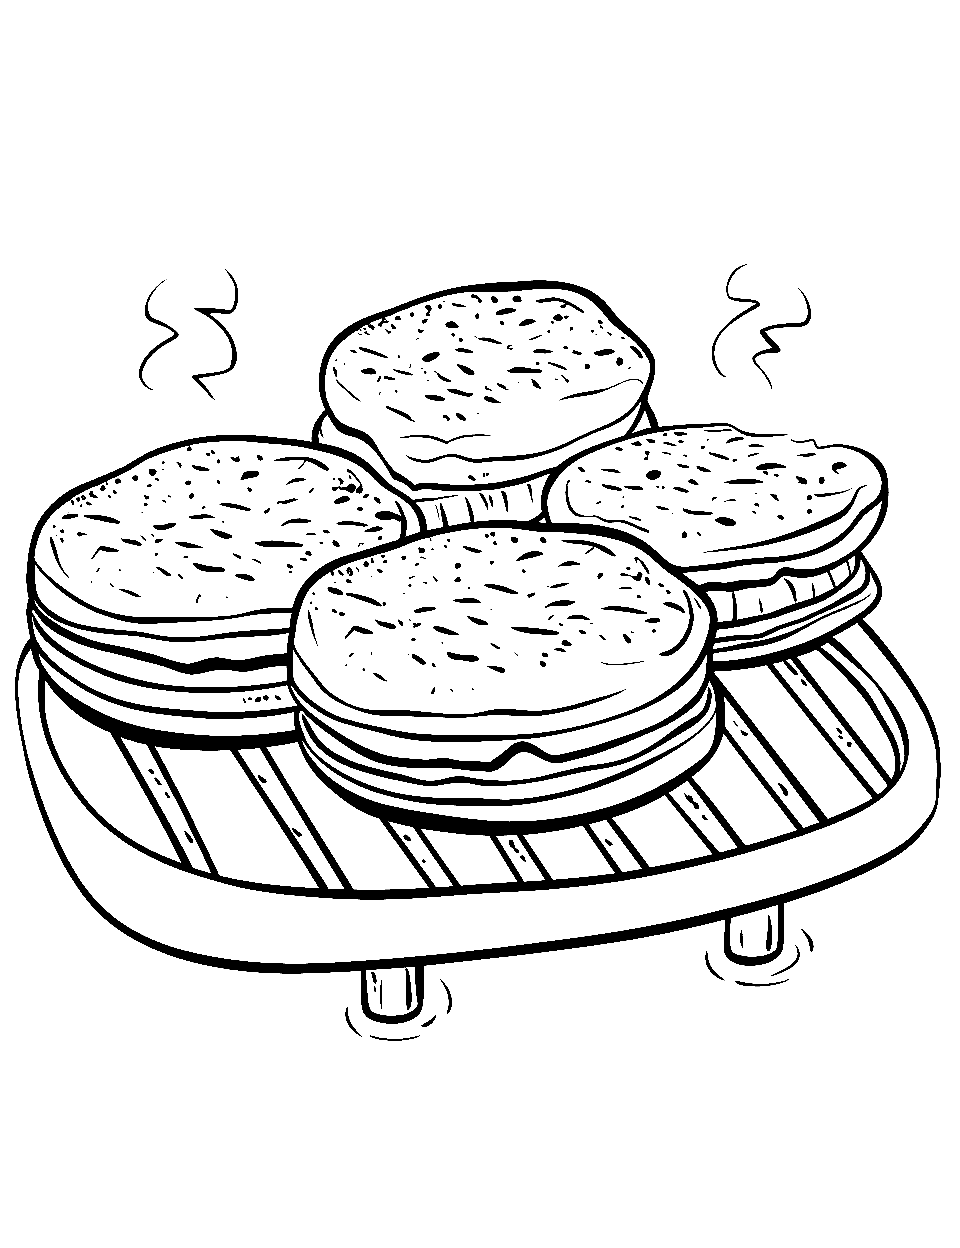 Beef BBQ Grill Food Coloring Page - Grilled beef steaks sizzling on a barbeque grill.